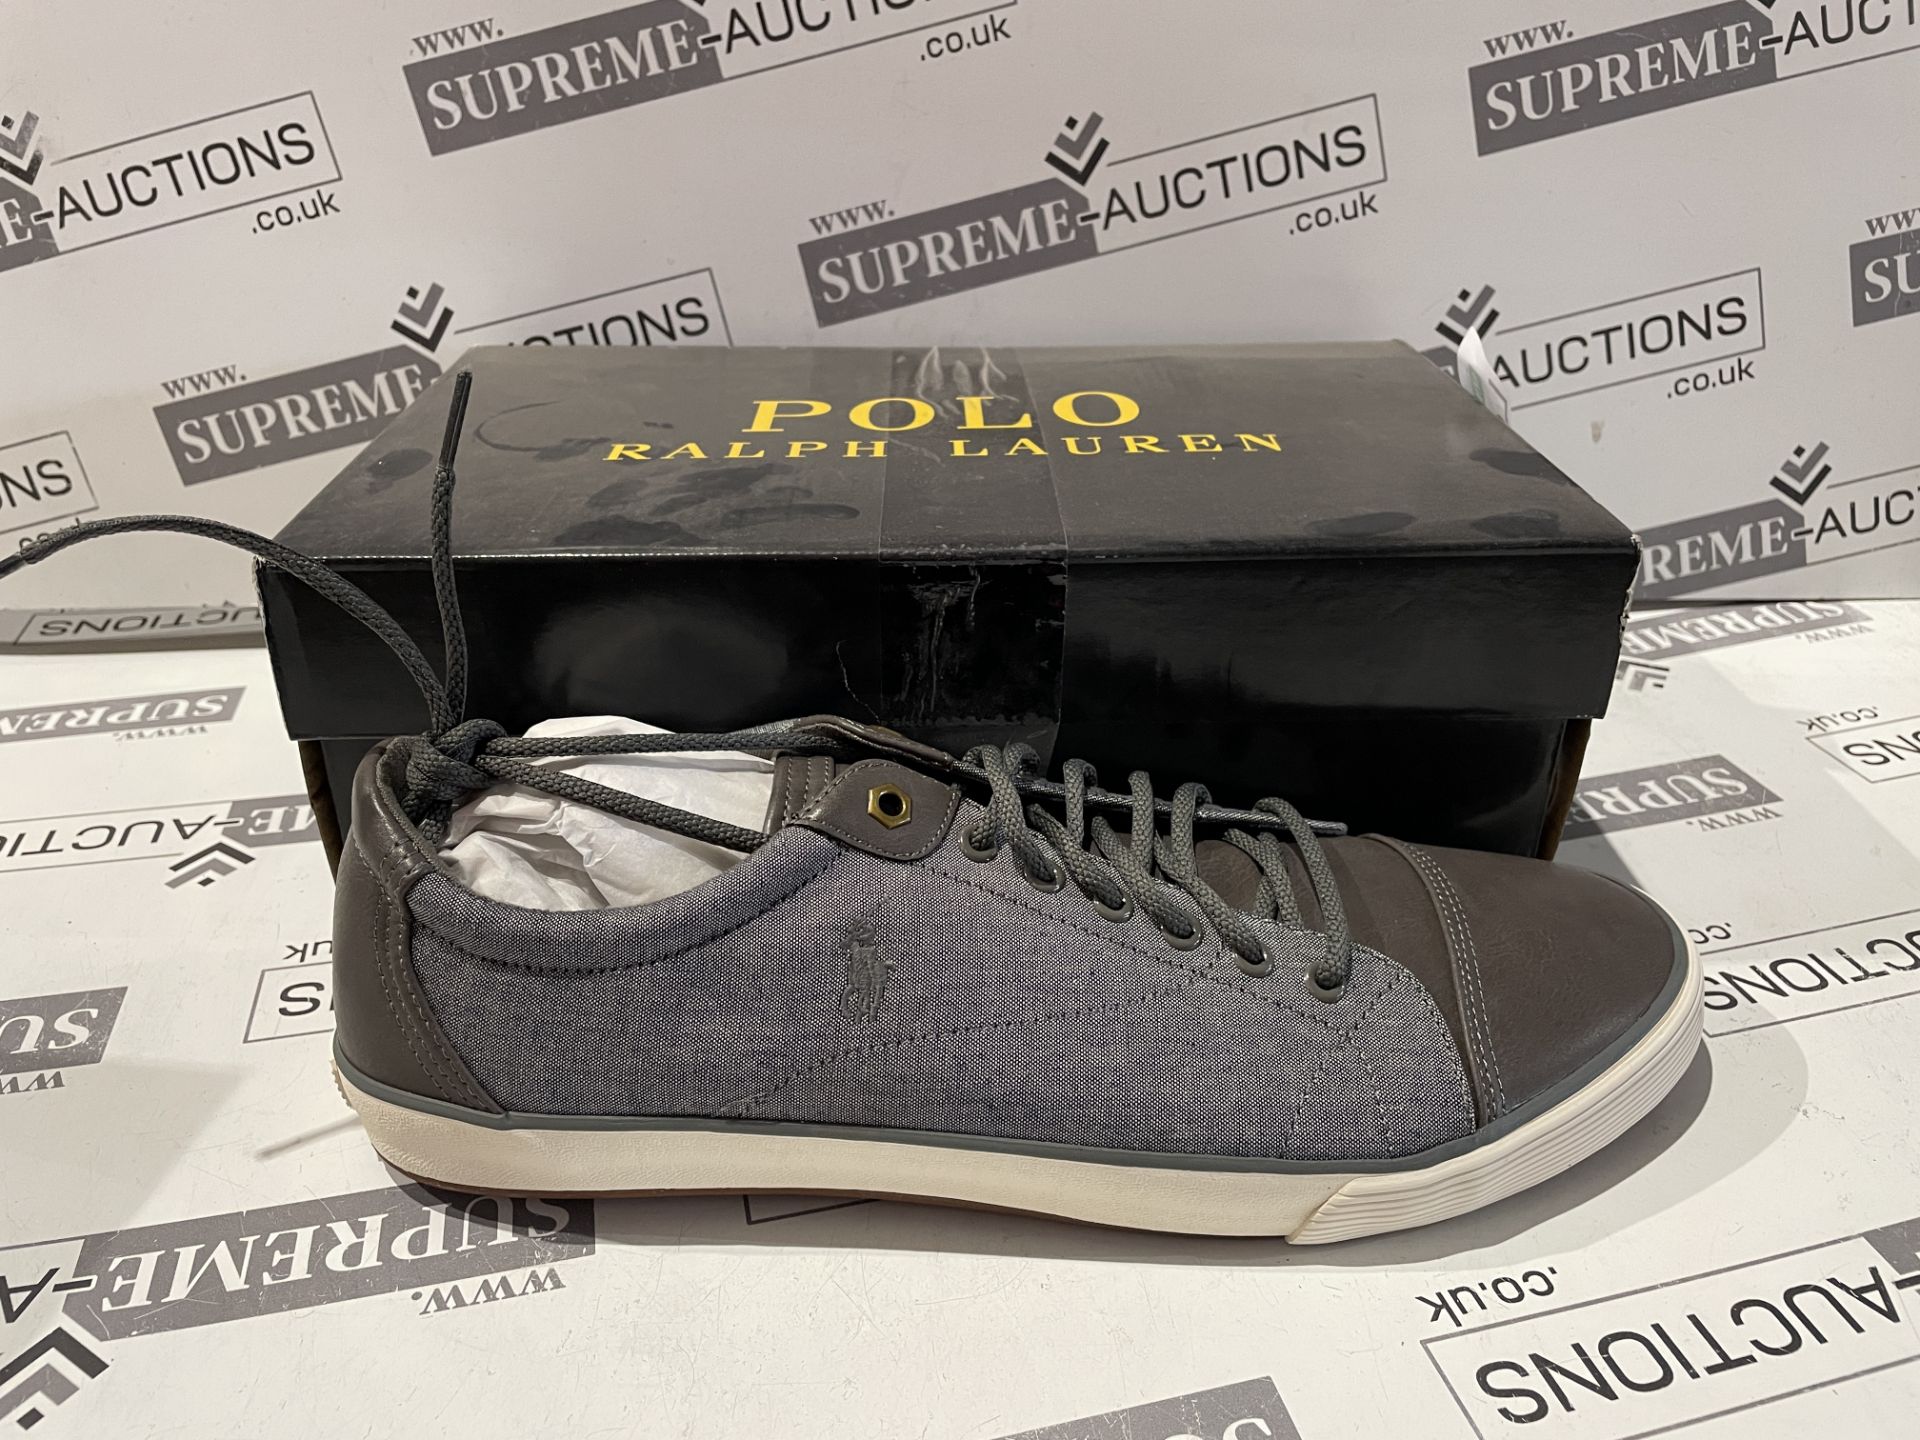 2 X BRAND NEW PAIRS OF RALPH LAUREN POLO GREY TRAINERS SZIE 14 R17-5